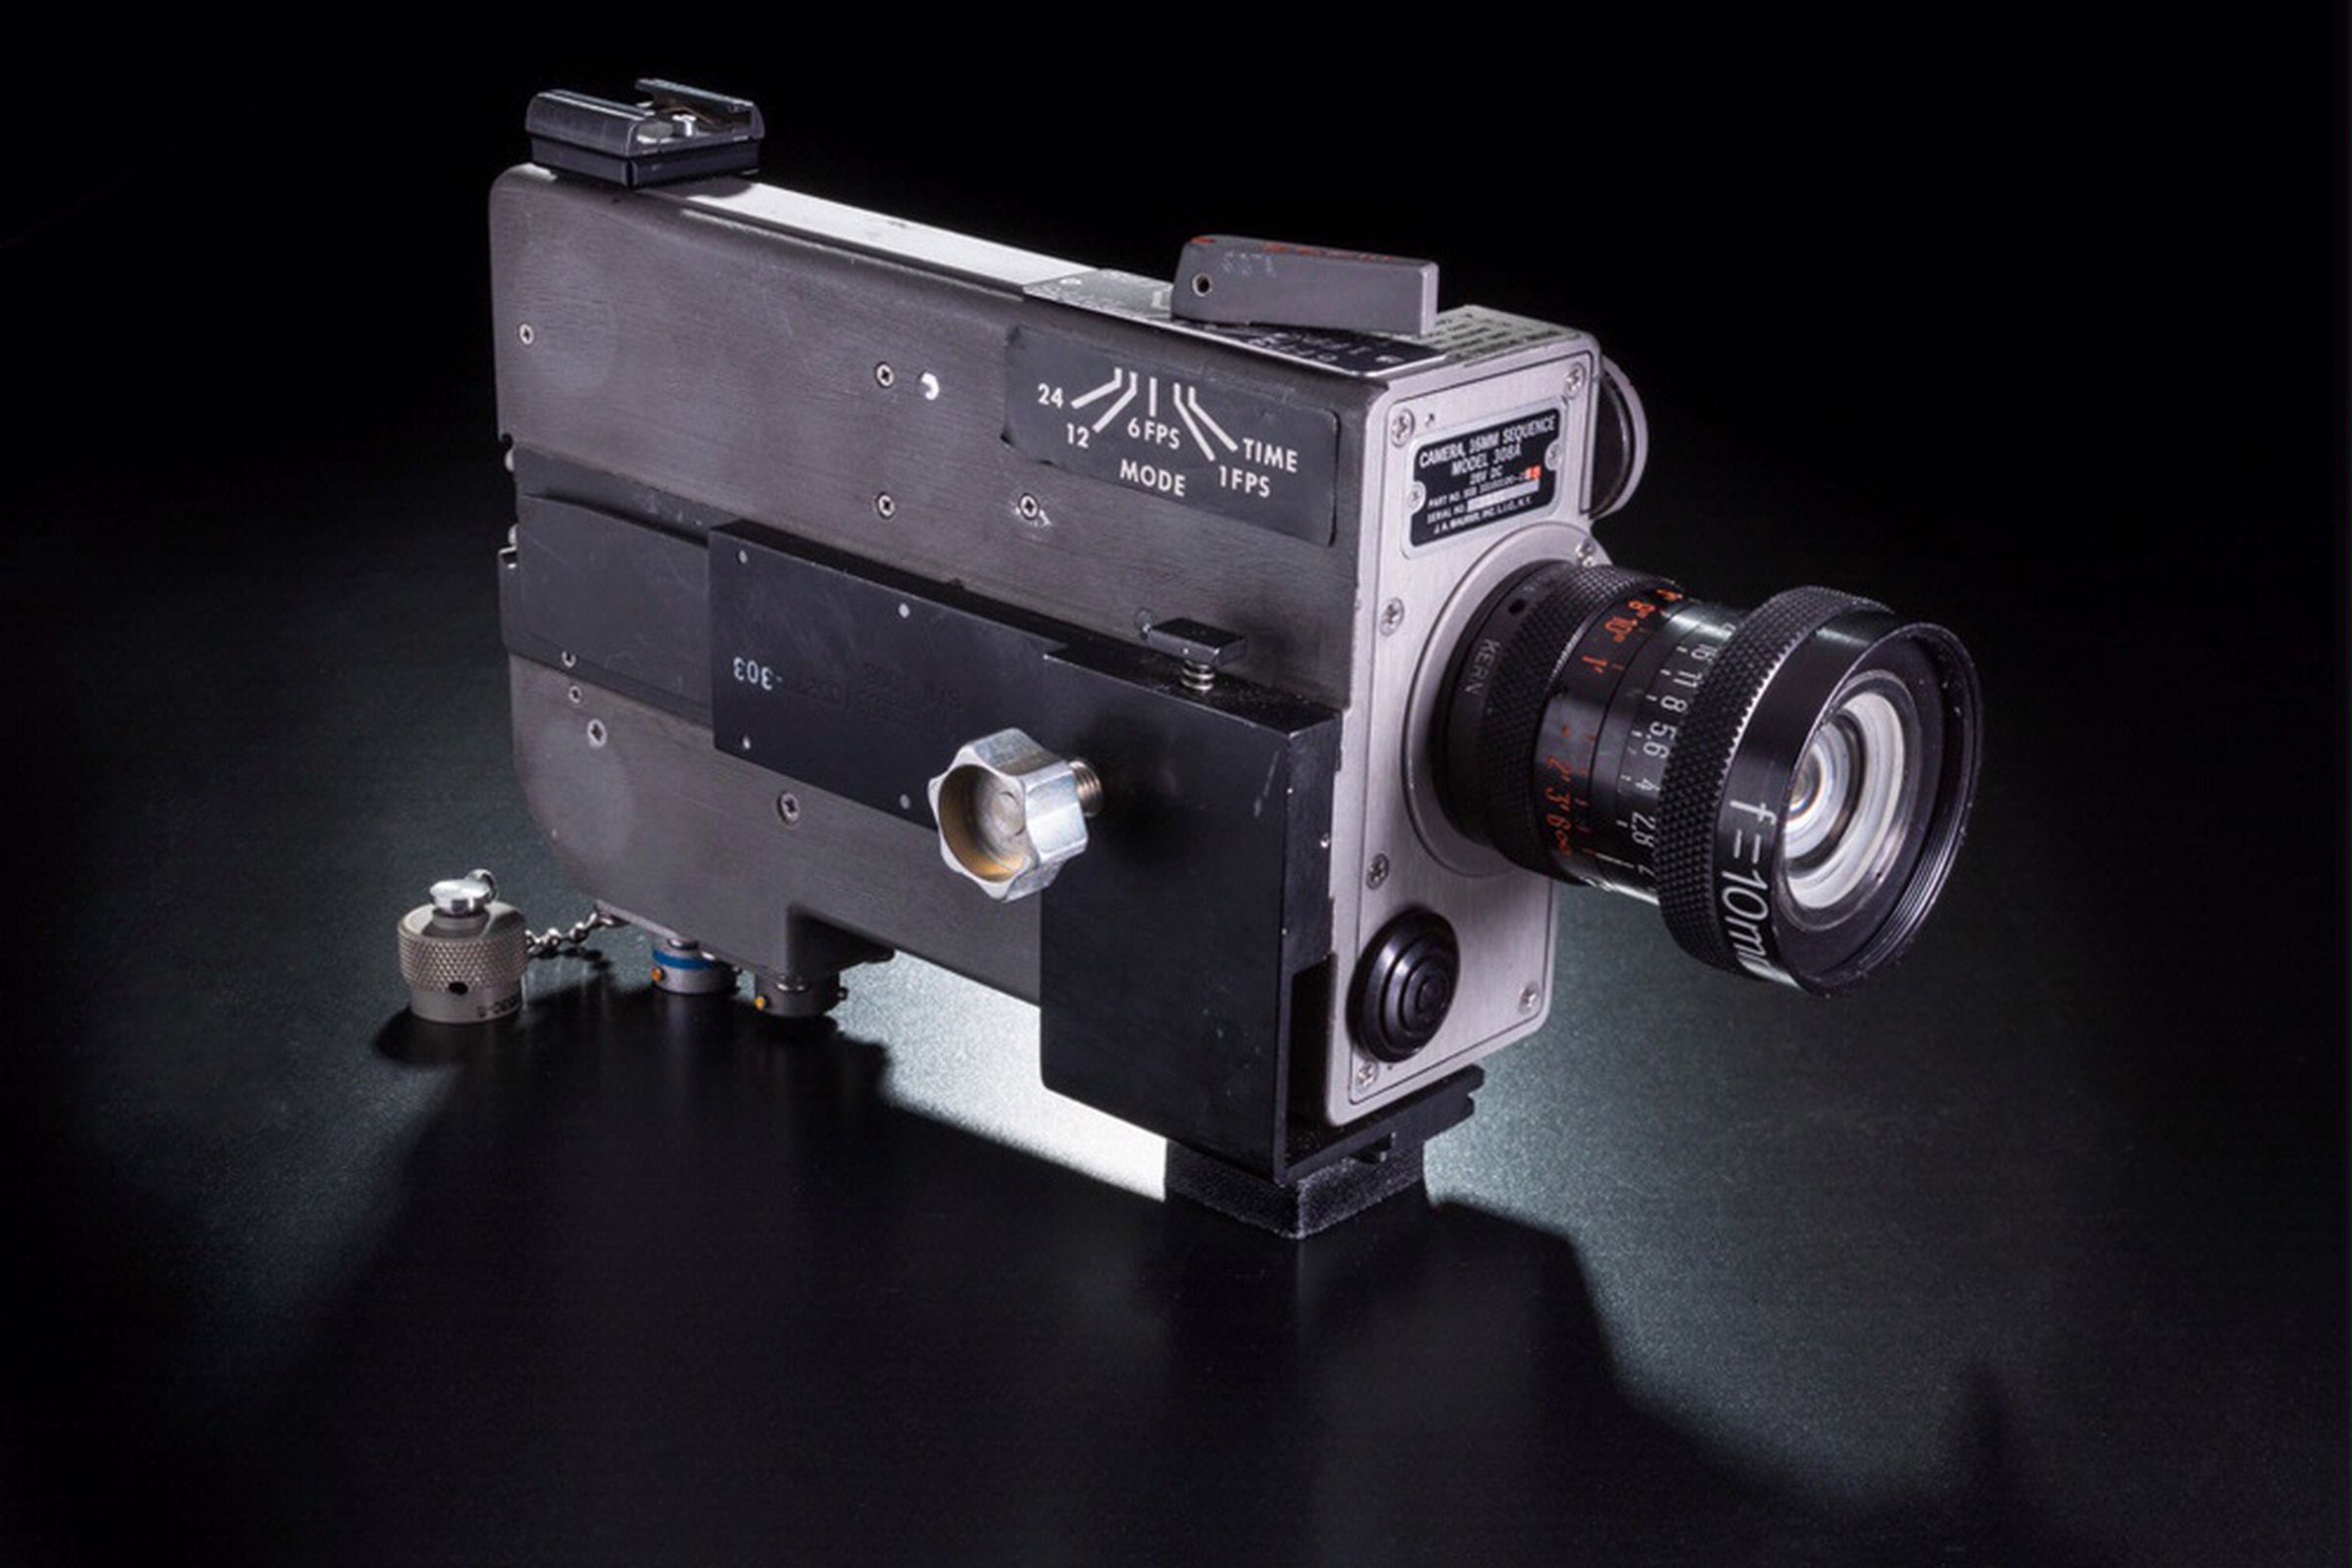 A never-before-seen 16mm Data Acquisition Camera used on the Apollo 11 missions.